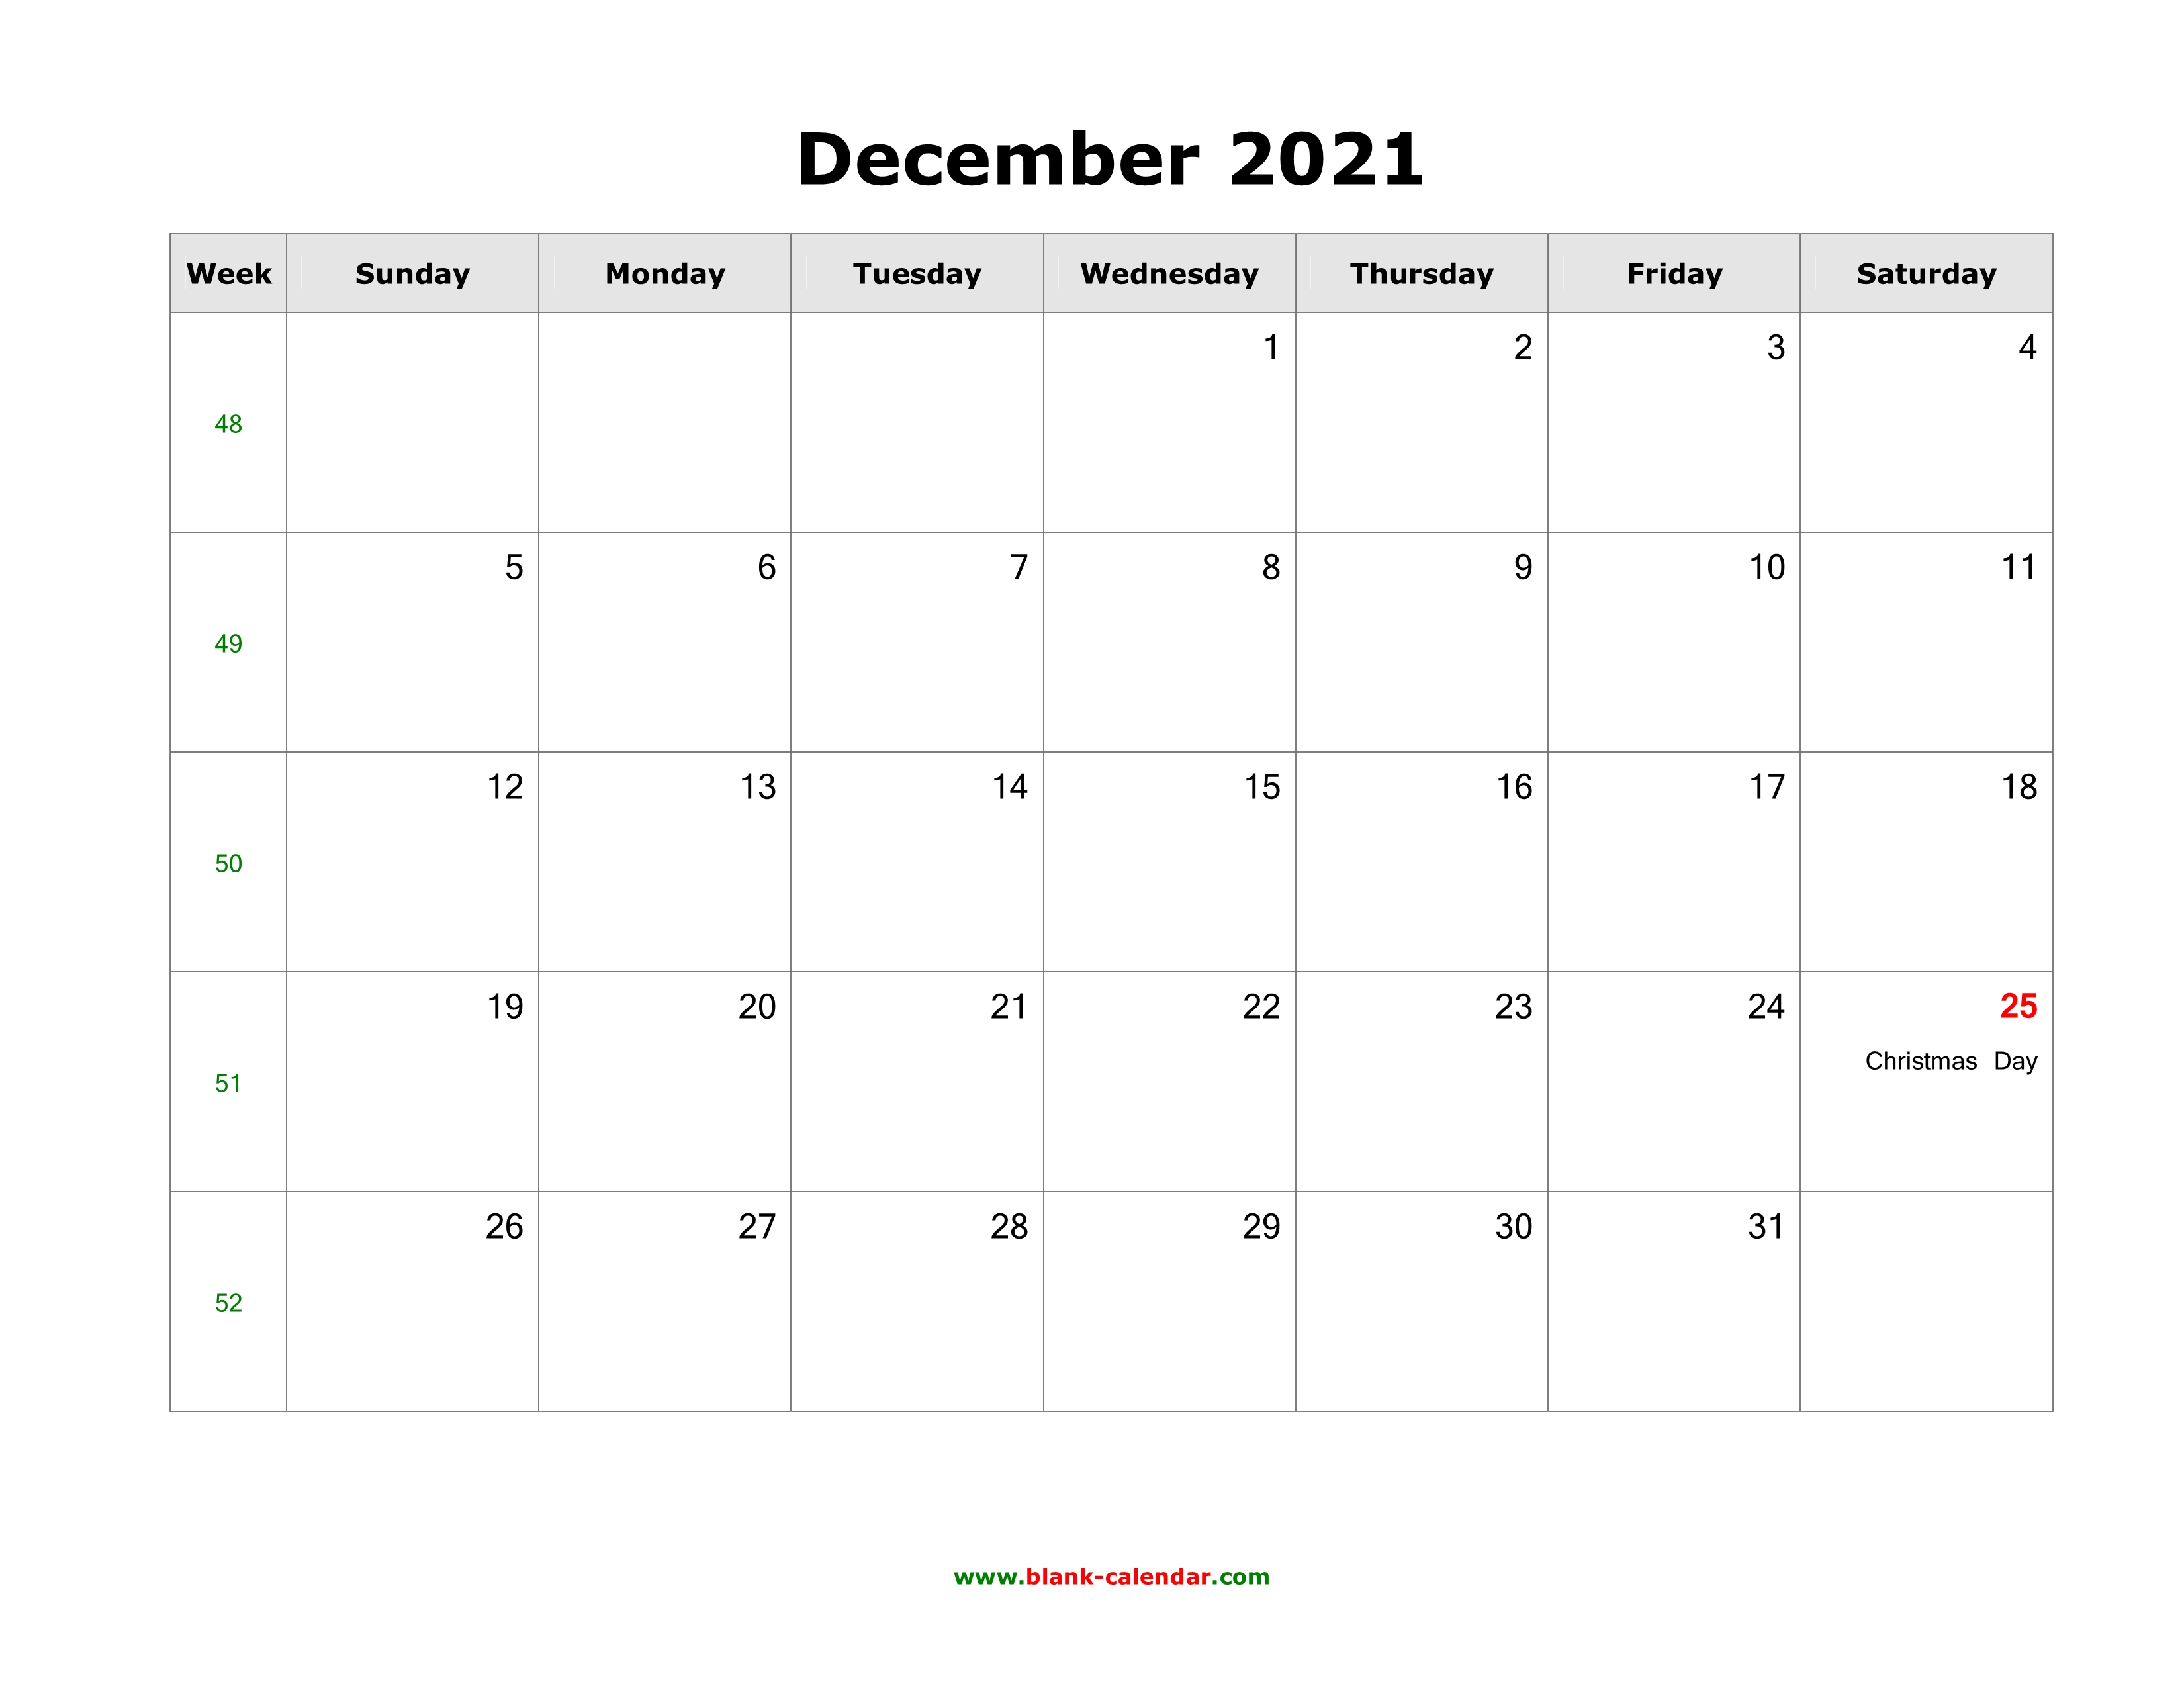 Download December 2021 Blank Calendar with US Holidays ...